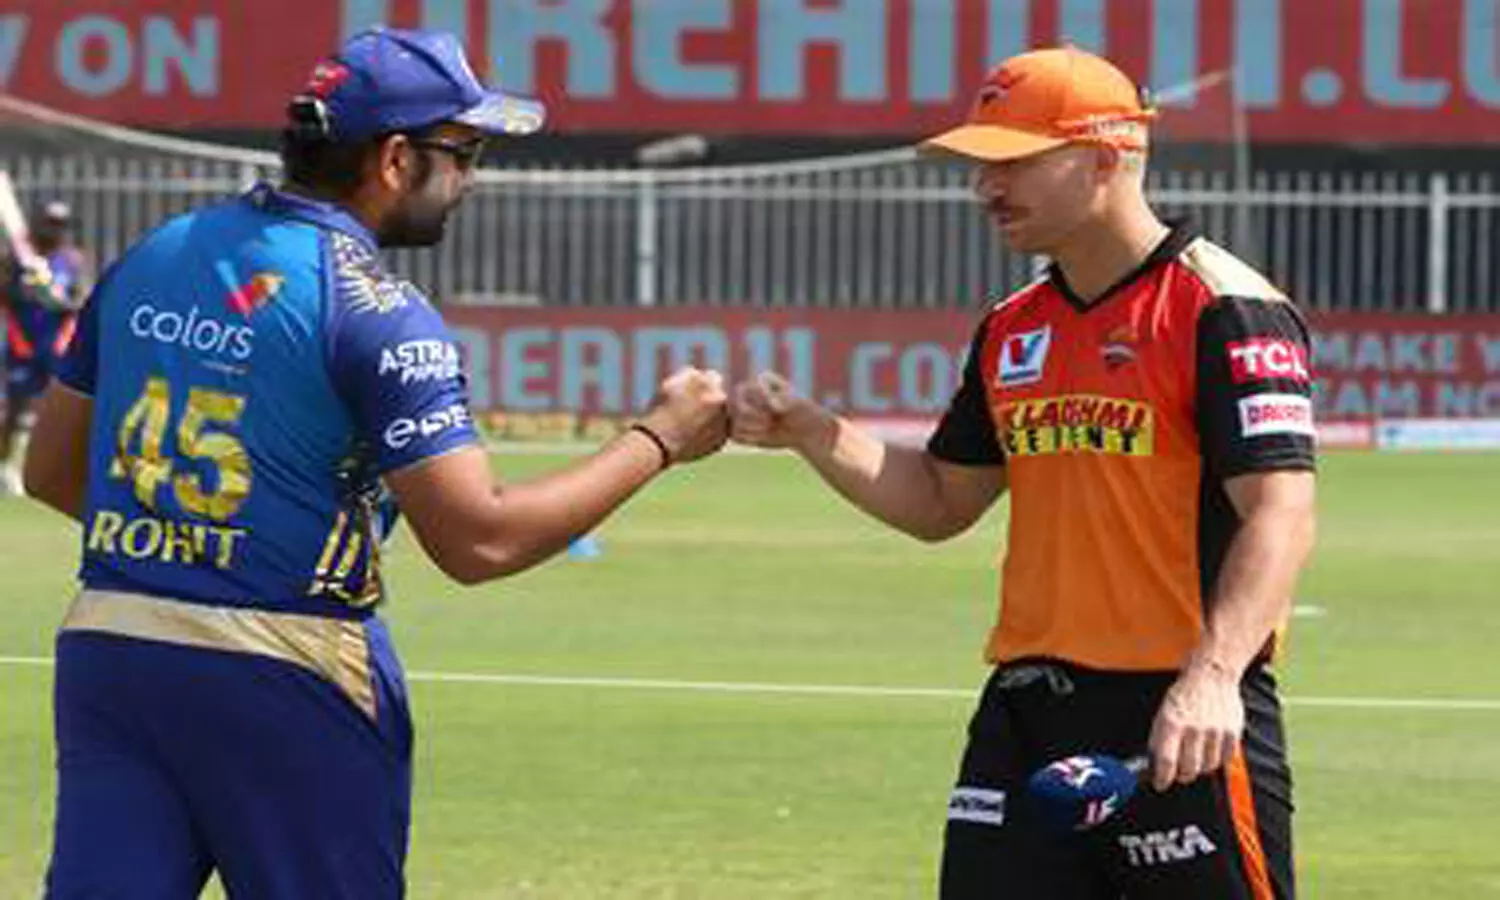 After a day COVID-19 hits IPL, match set to resume with SRH vs MI battle in Delhi